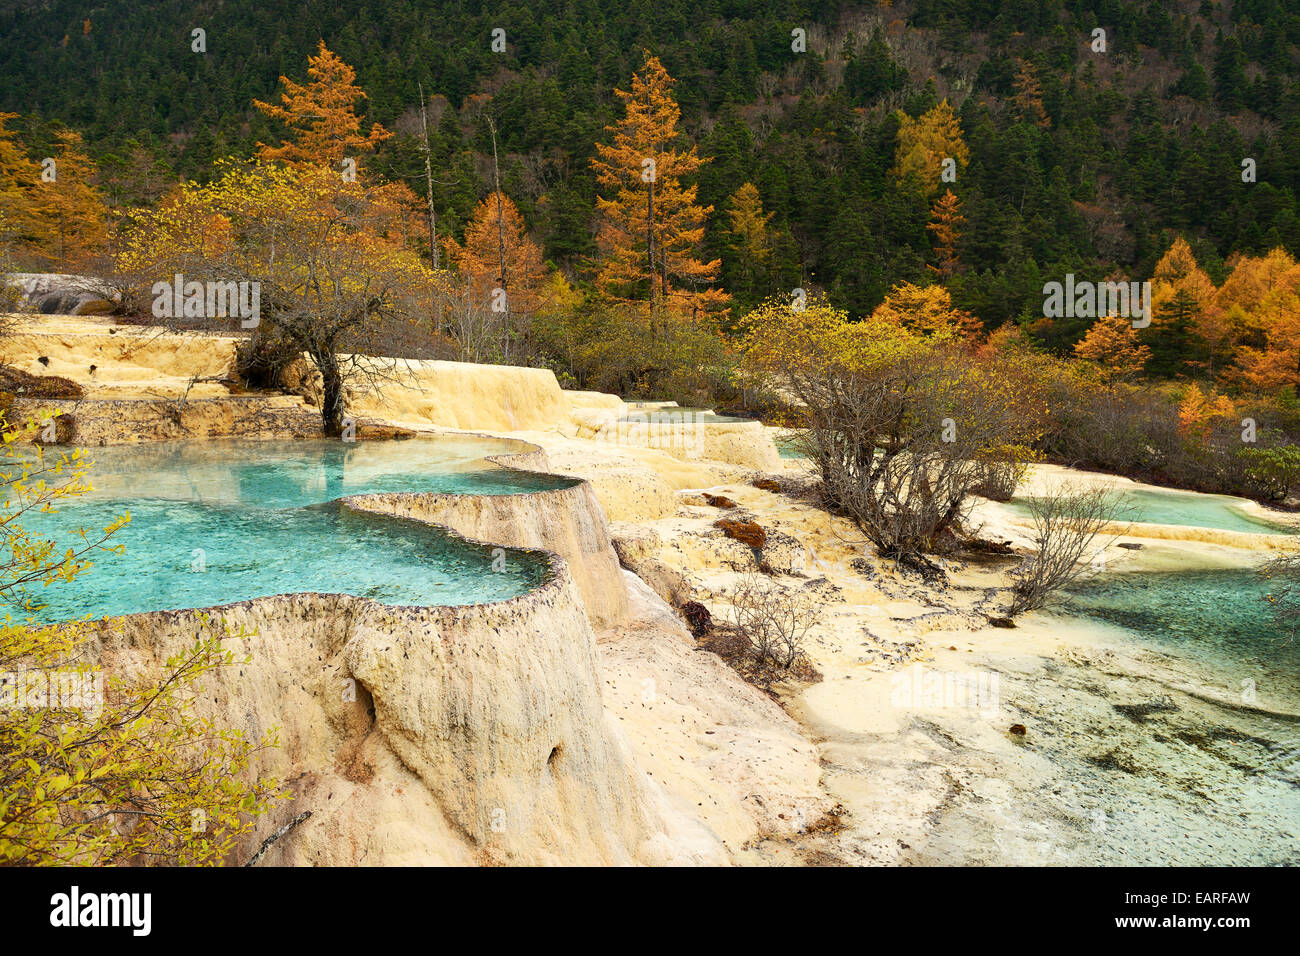 Lime terraces with lake in autumnal environment, Huanglong National Park, Sichuan Province, China Stock Photo